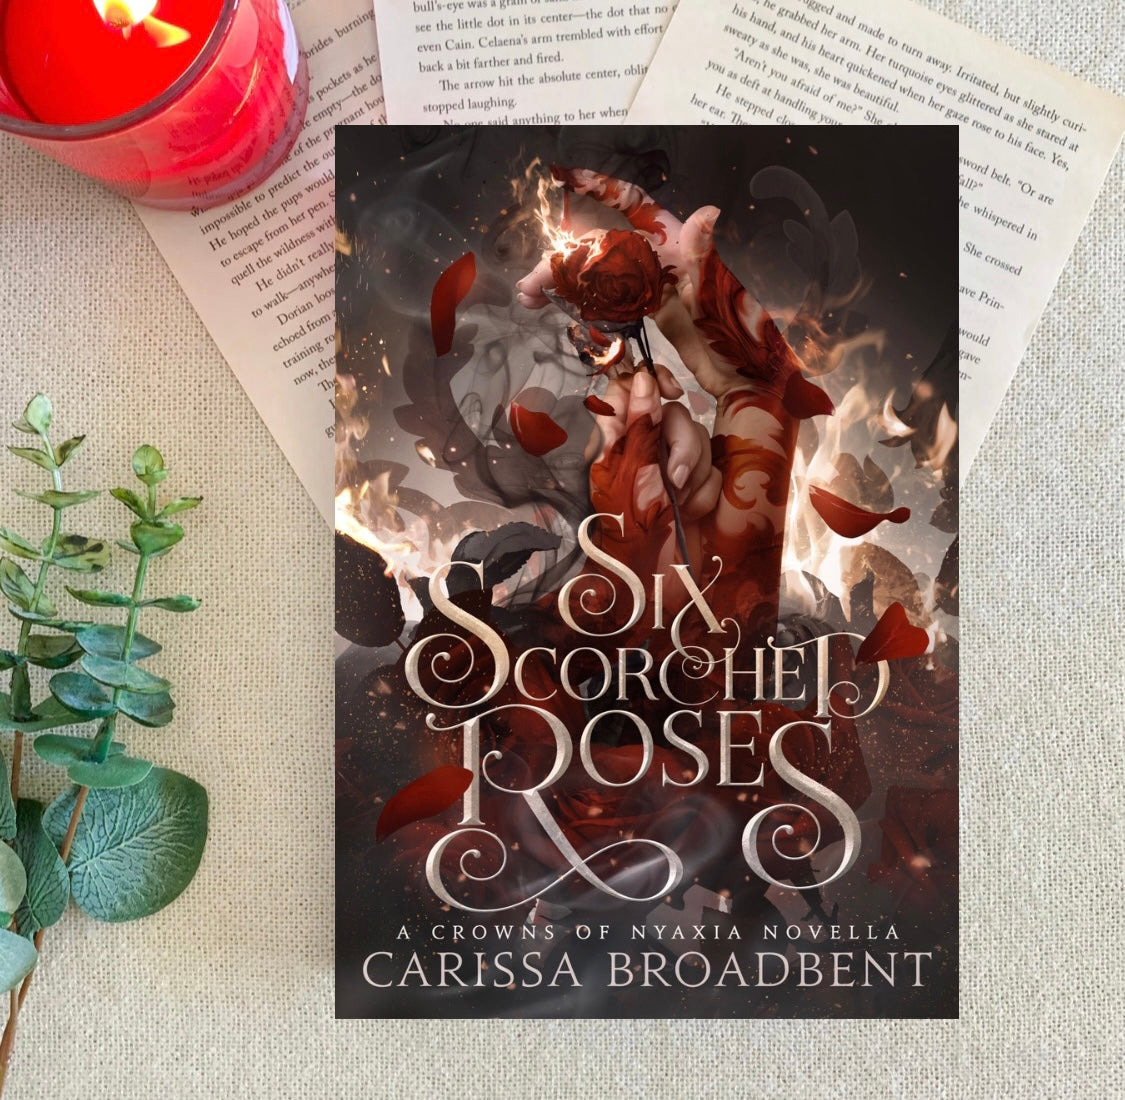 Crowns of Nyaxia Series by Carissa Broadbent (Hardcovers)